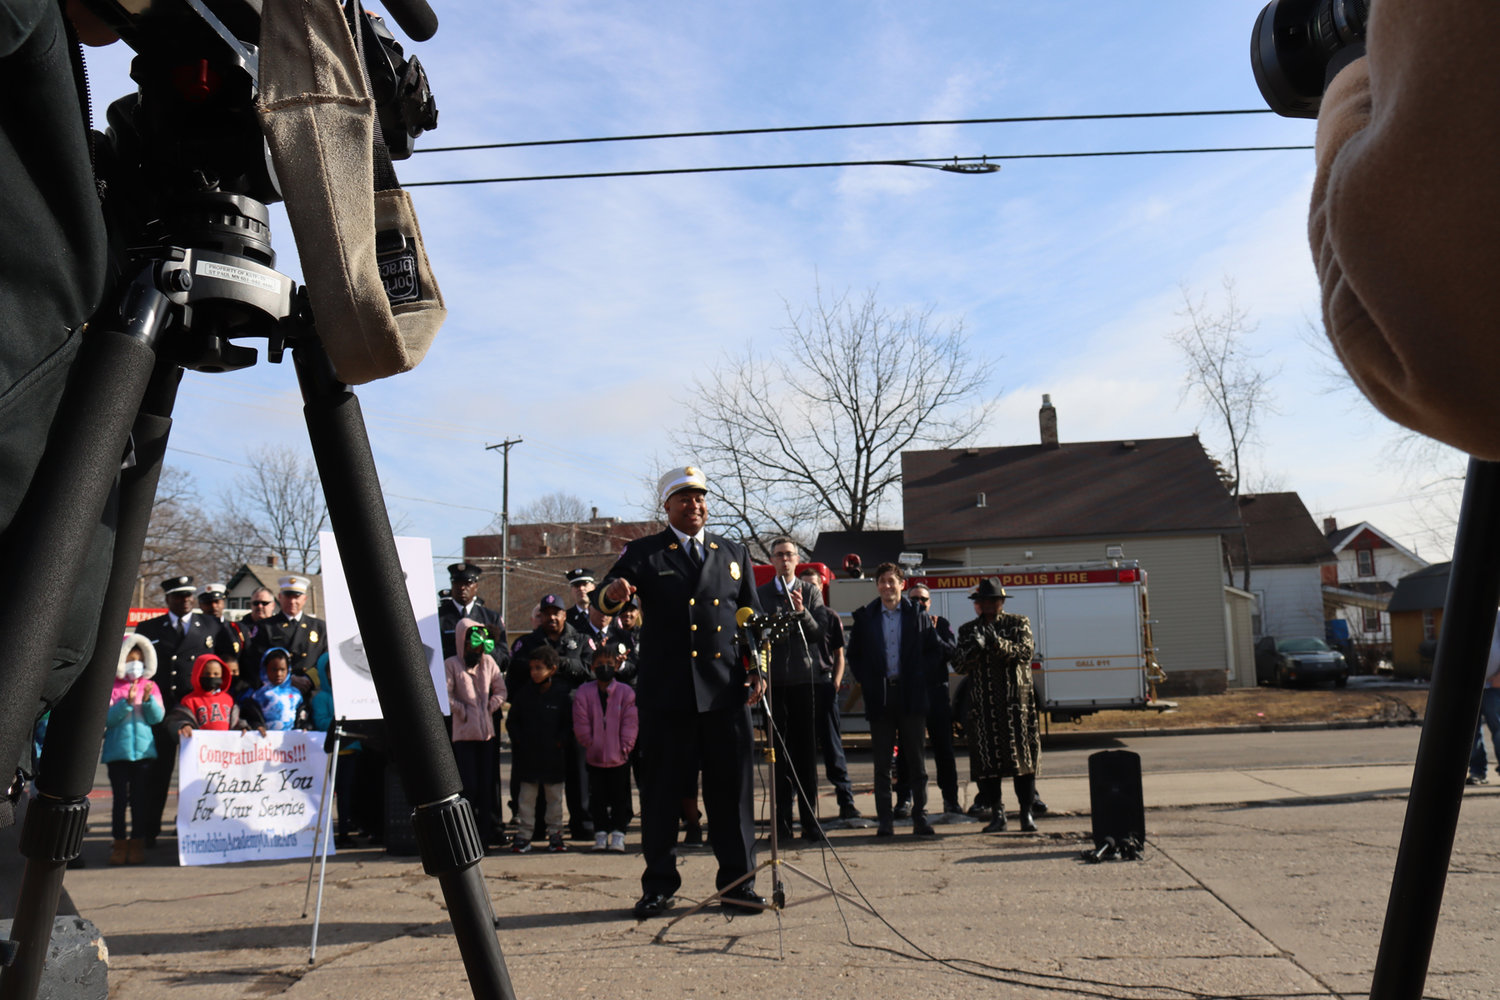 Minneapolis' second Black fire chief, Bryan Tyner, speaks at the renaming ceremony in Longfellow on March 17. "I'm just so happy to see this day finally here," said Tyner.  (Photo by Tesha M. Christensen)